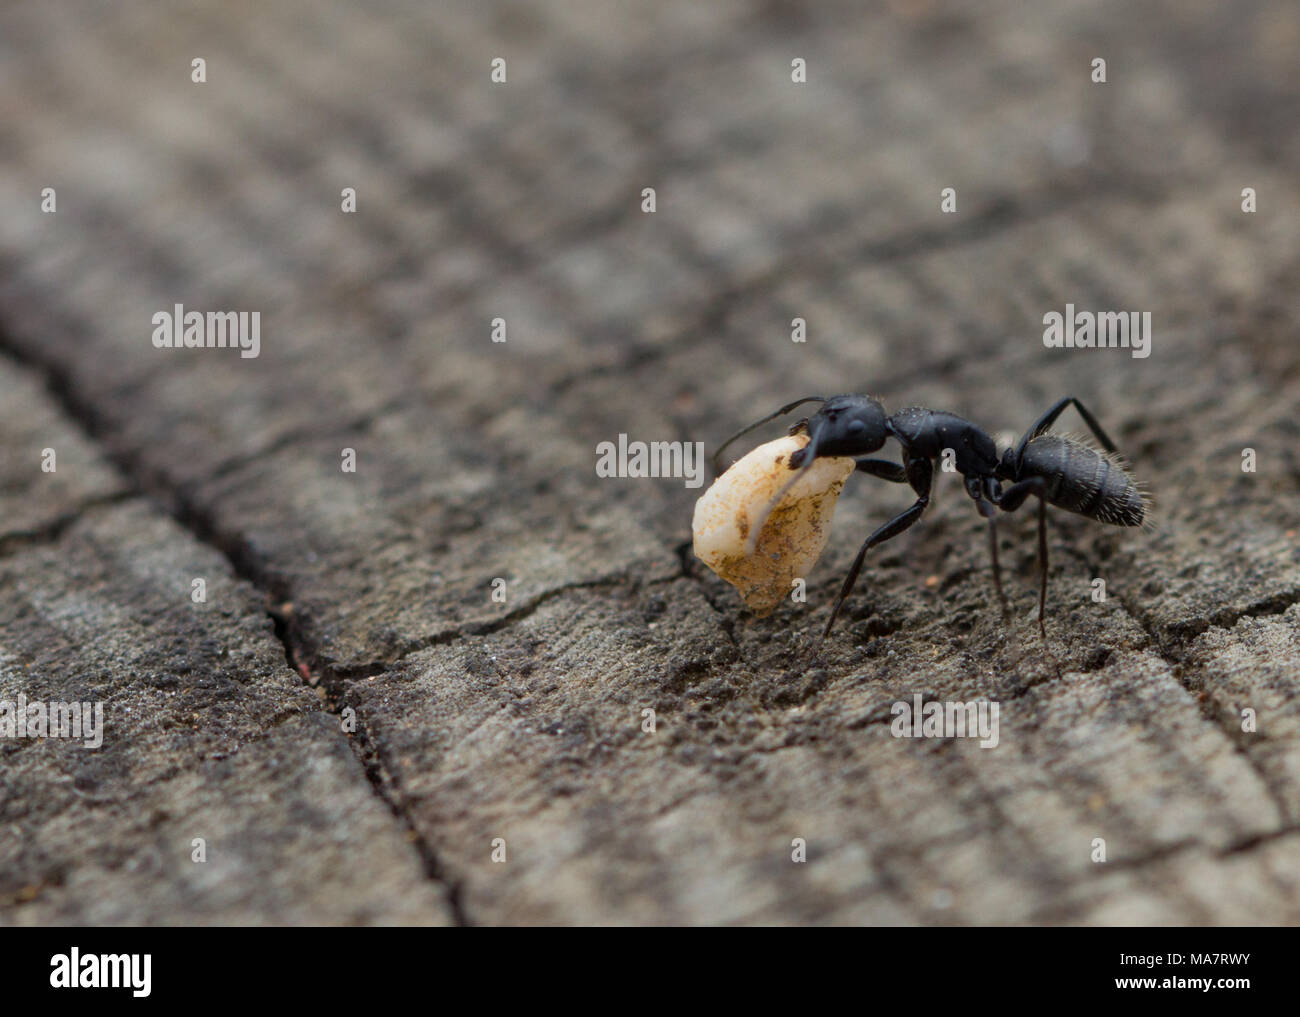 ant on wood background. image of a Stock Photo